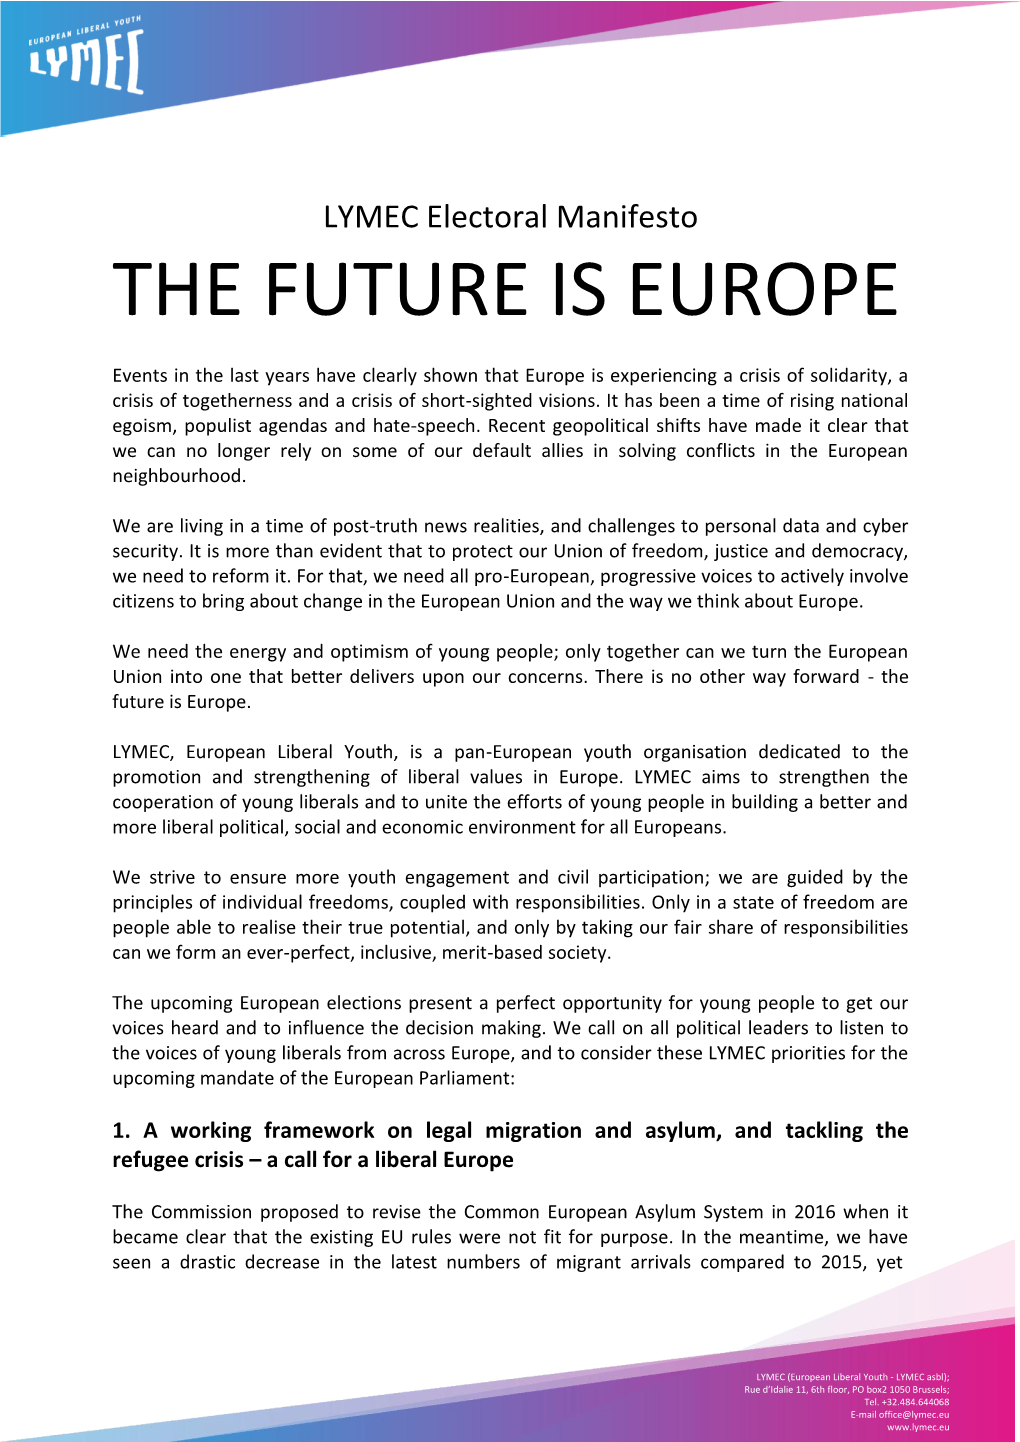 The Future Is Europe